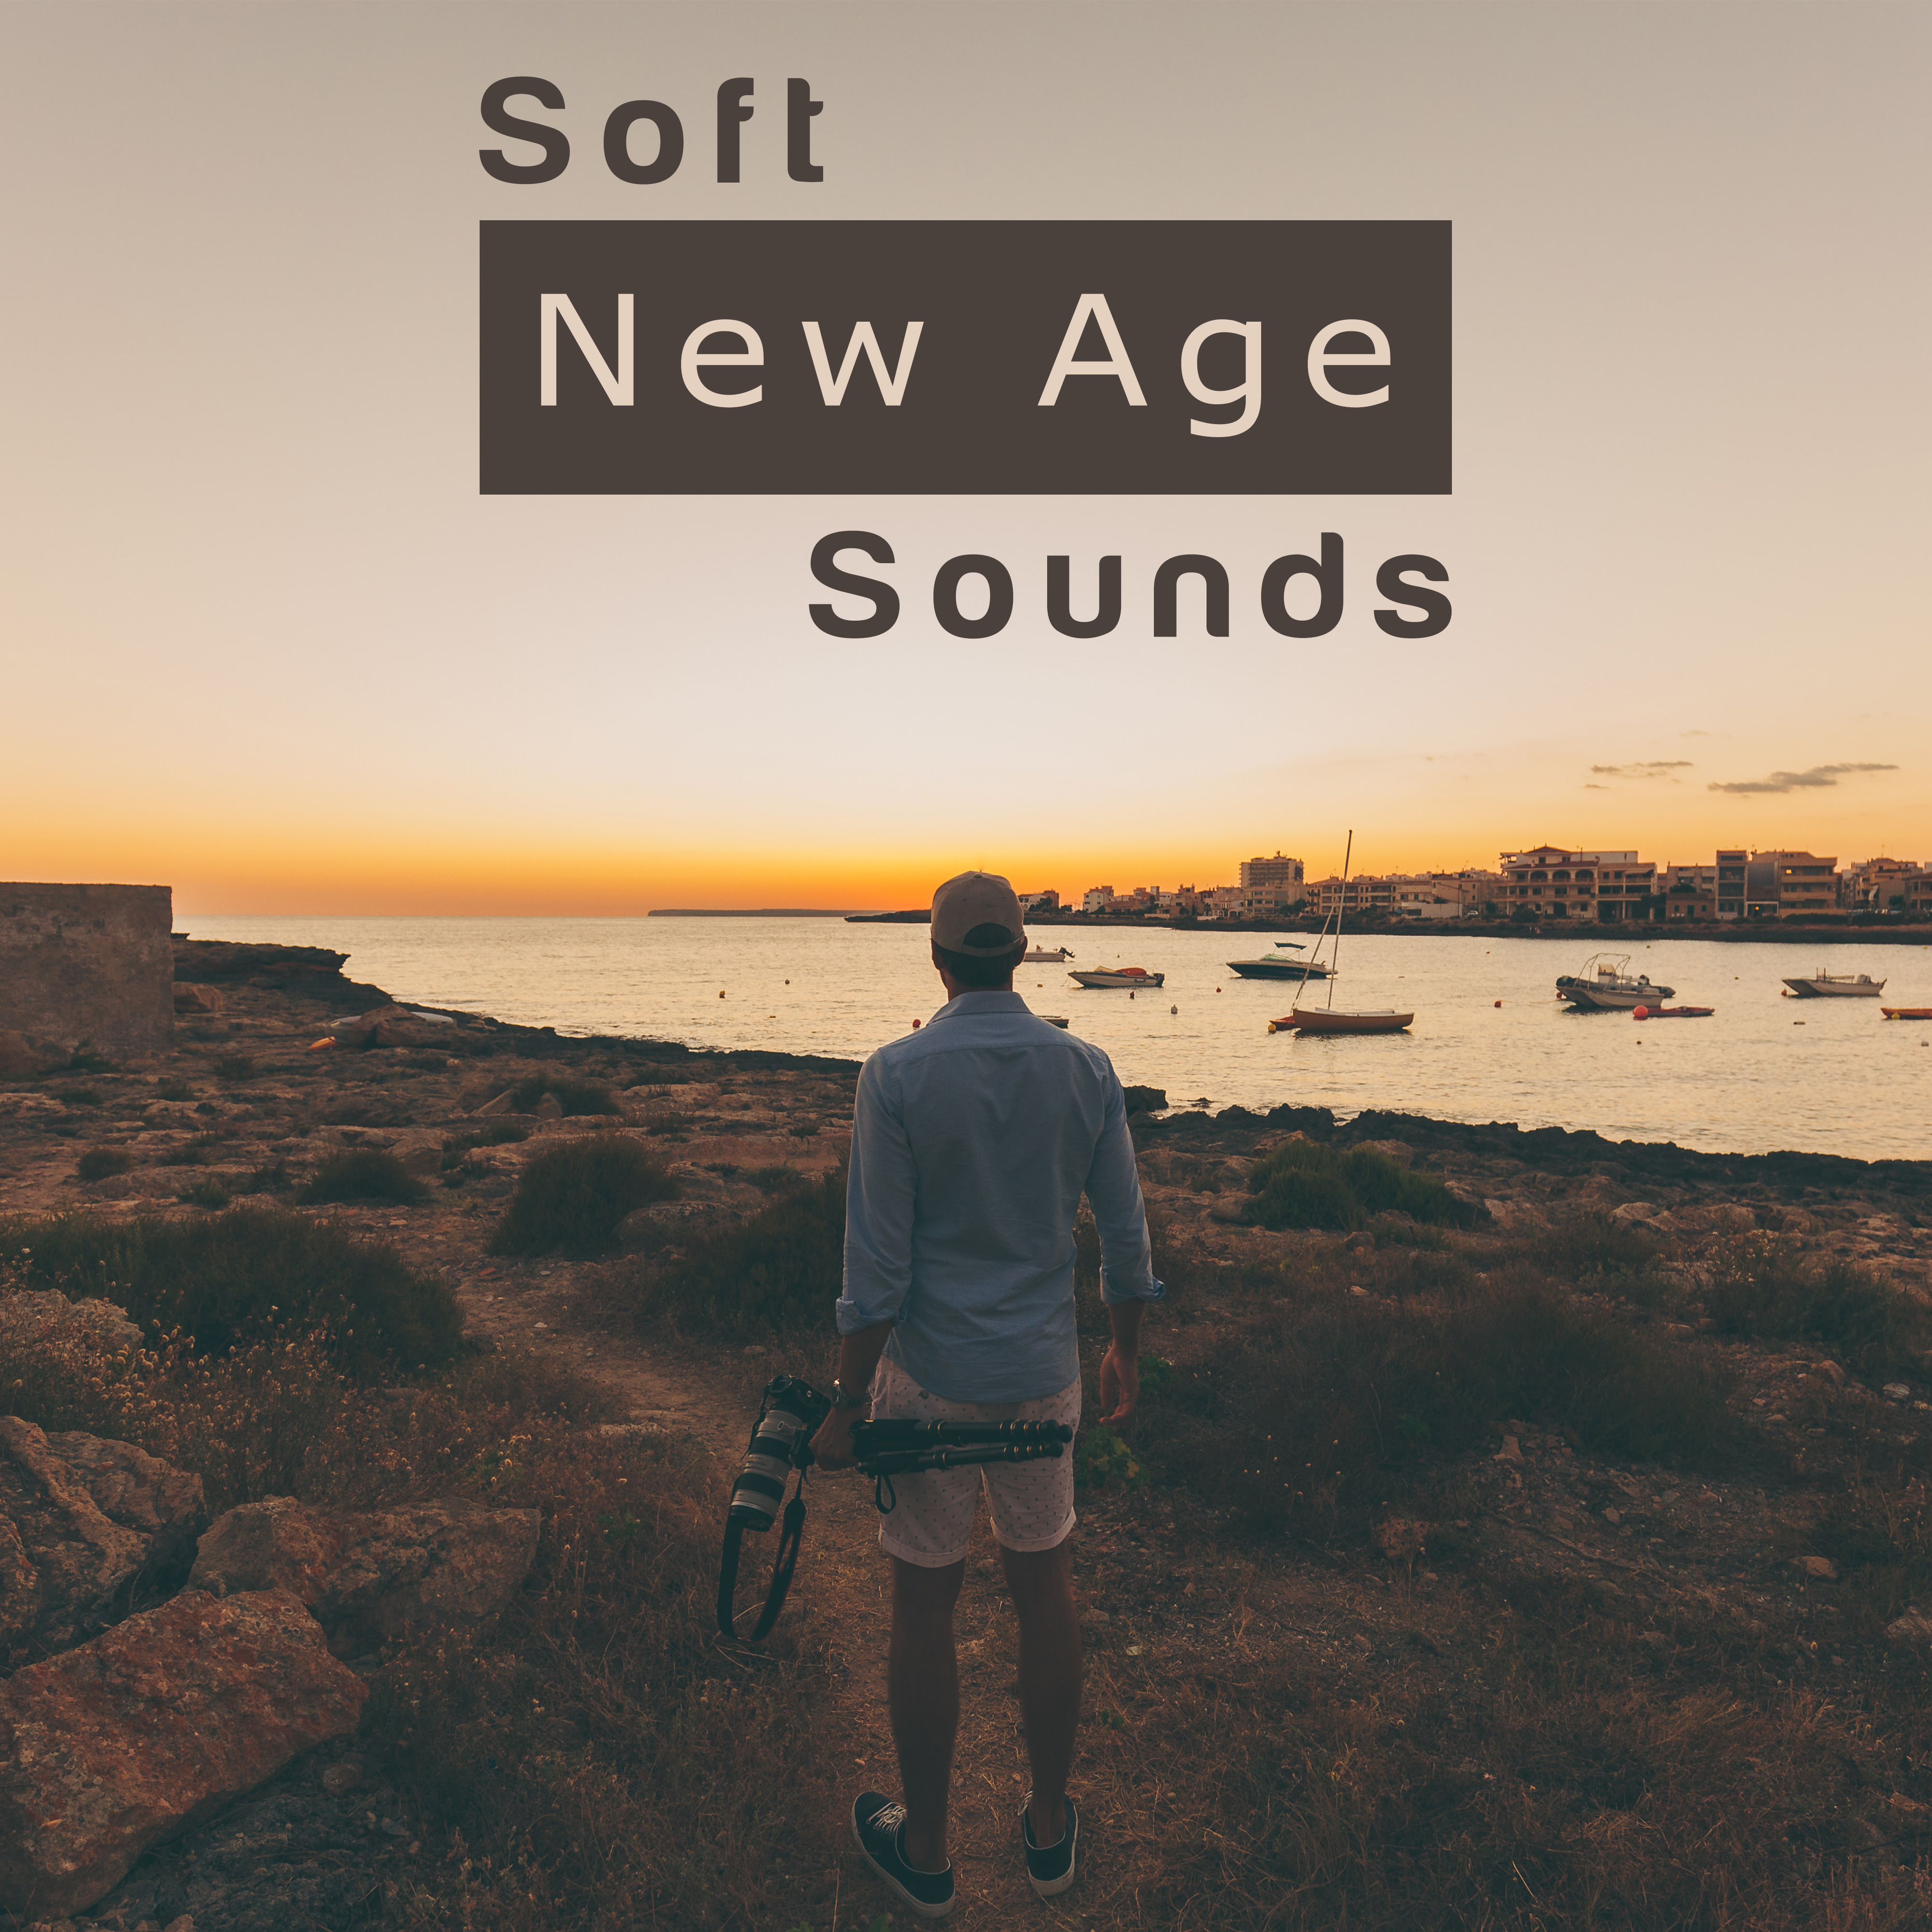 Soft New Age Sounds  Chilled Memories, Sensual Touch, Healing Therapy, Relaxing New Age Music